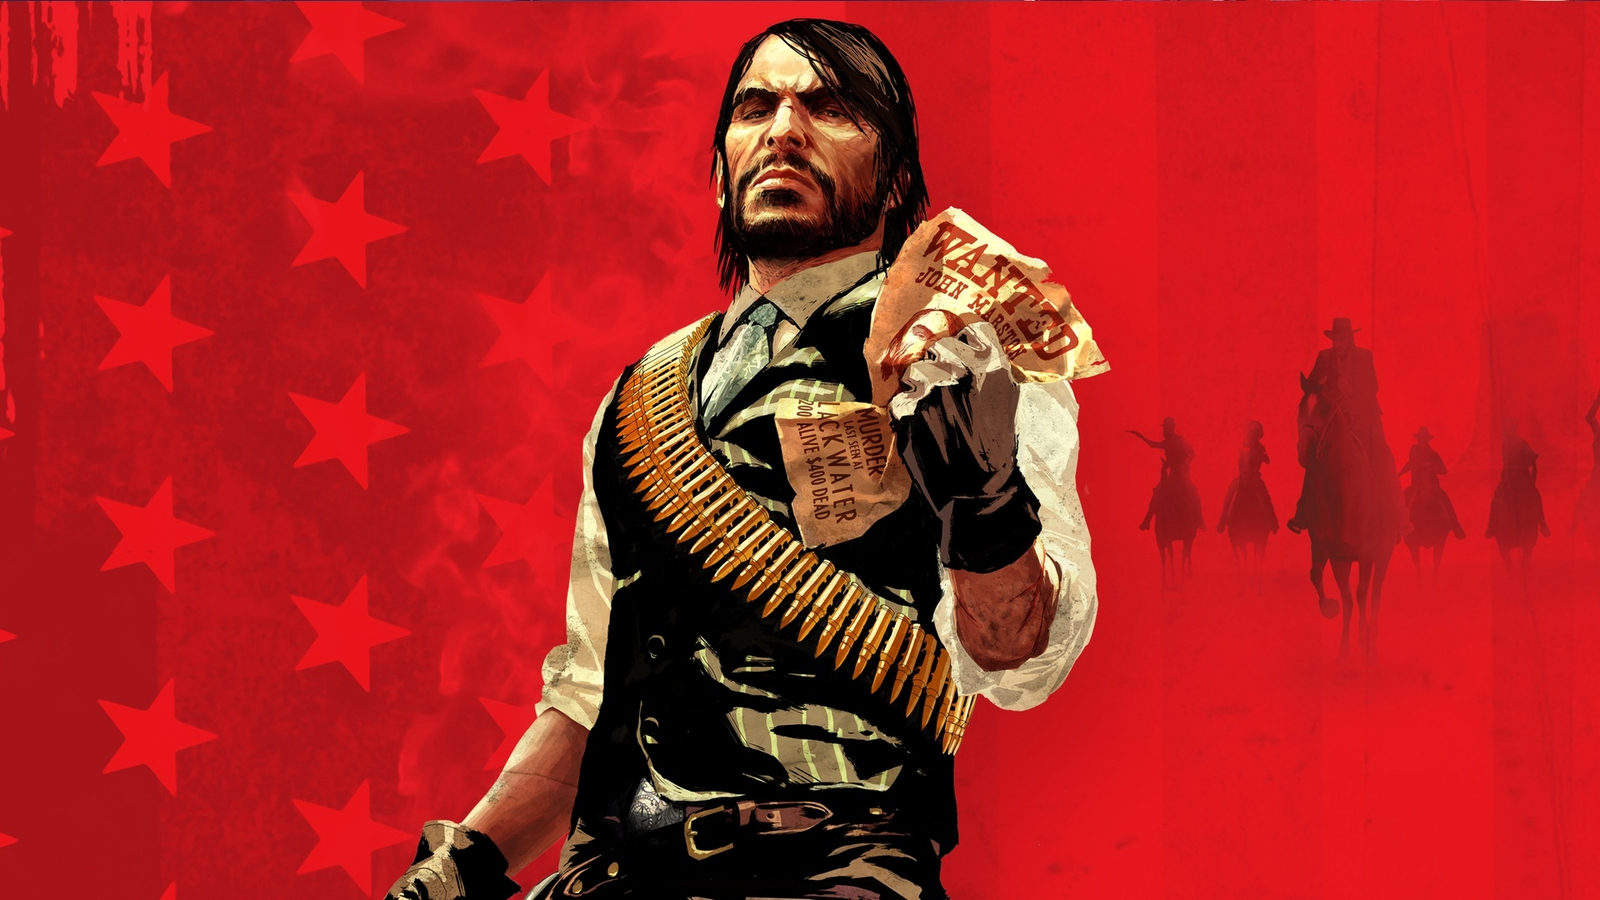 Original Red Dead Redemption No Longer Playable on PS4 and PS5